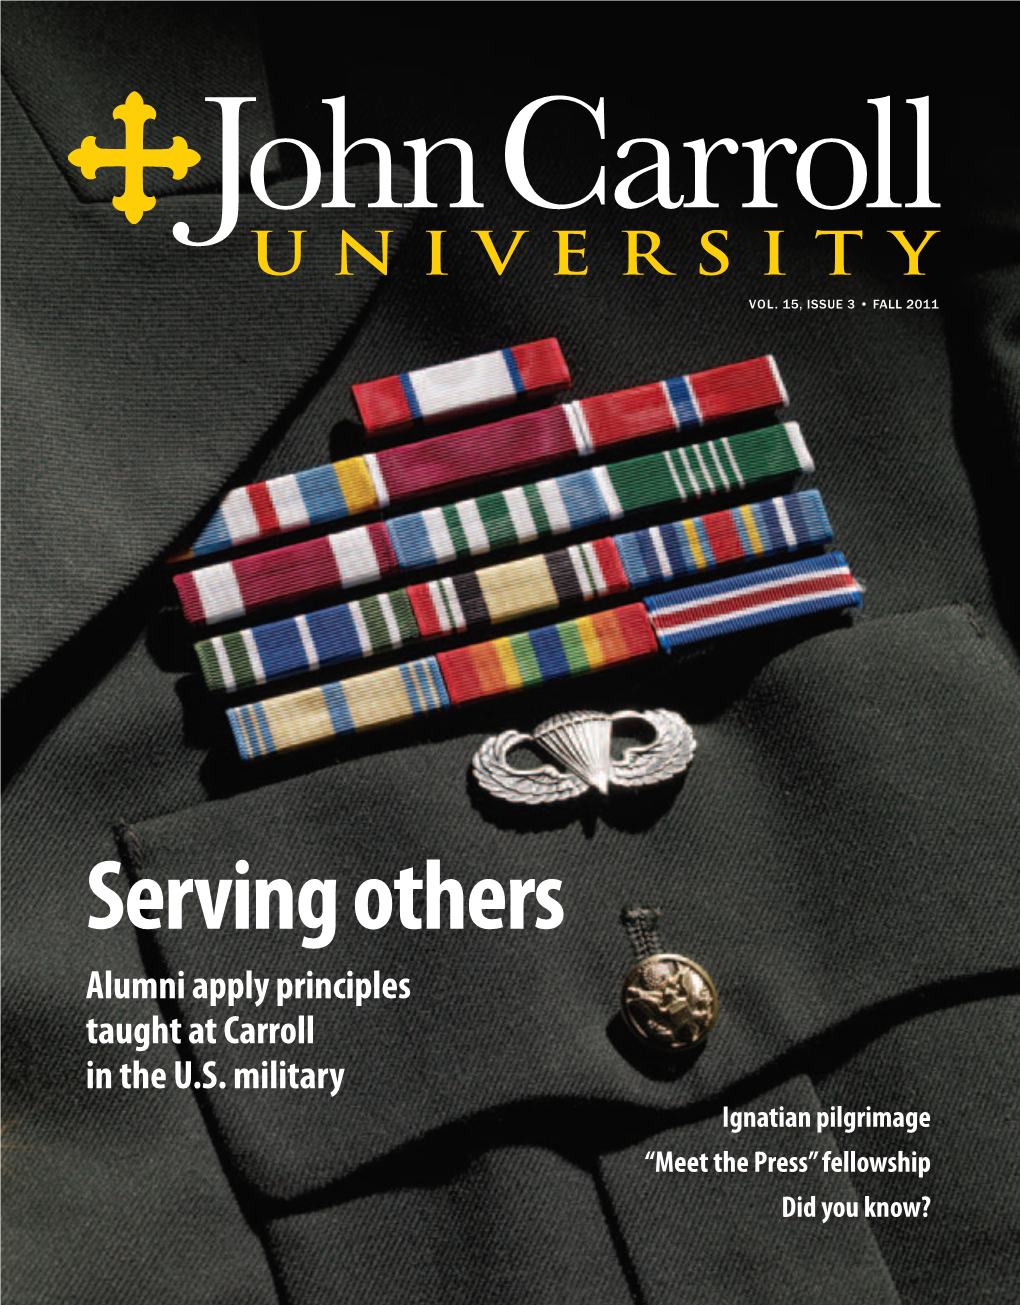 Serving Others Alumni Apply Principles Taught at Carroll in the U.S